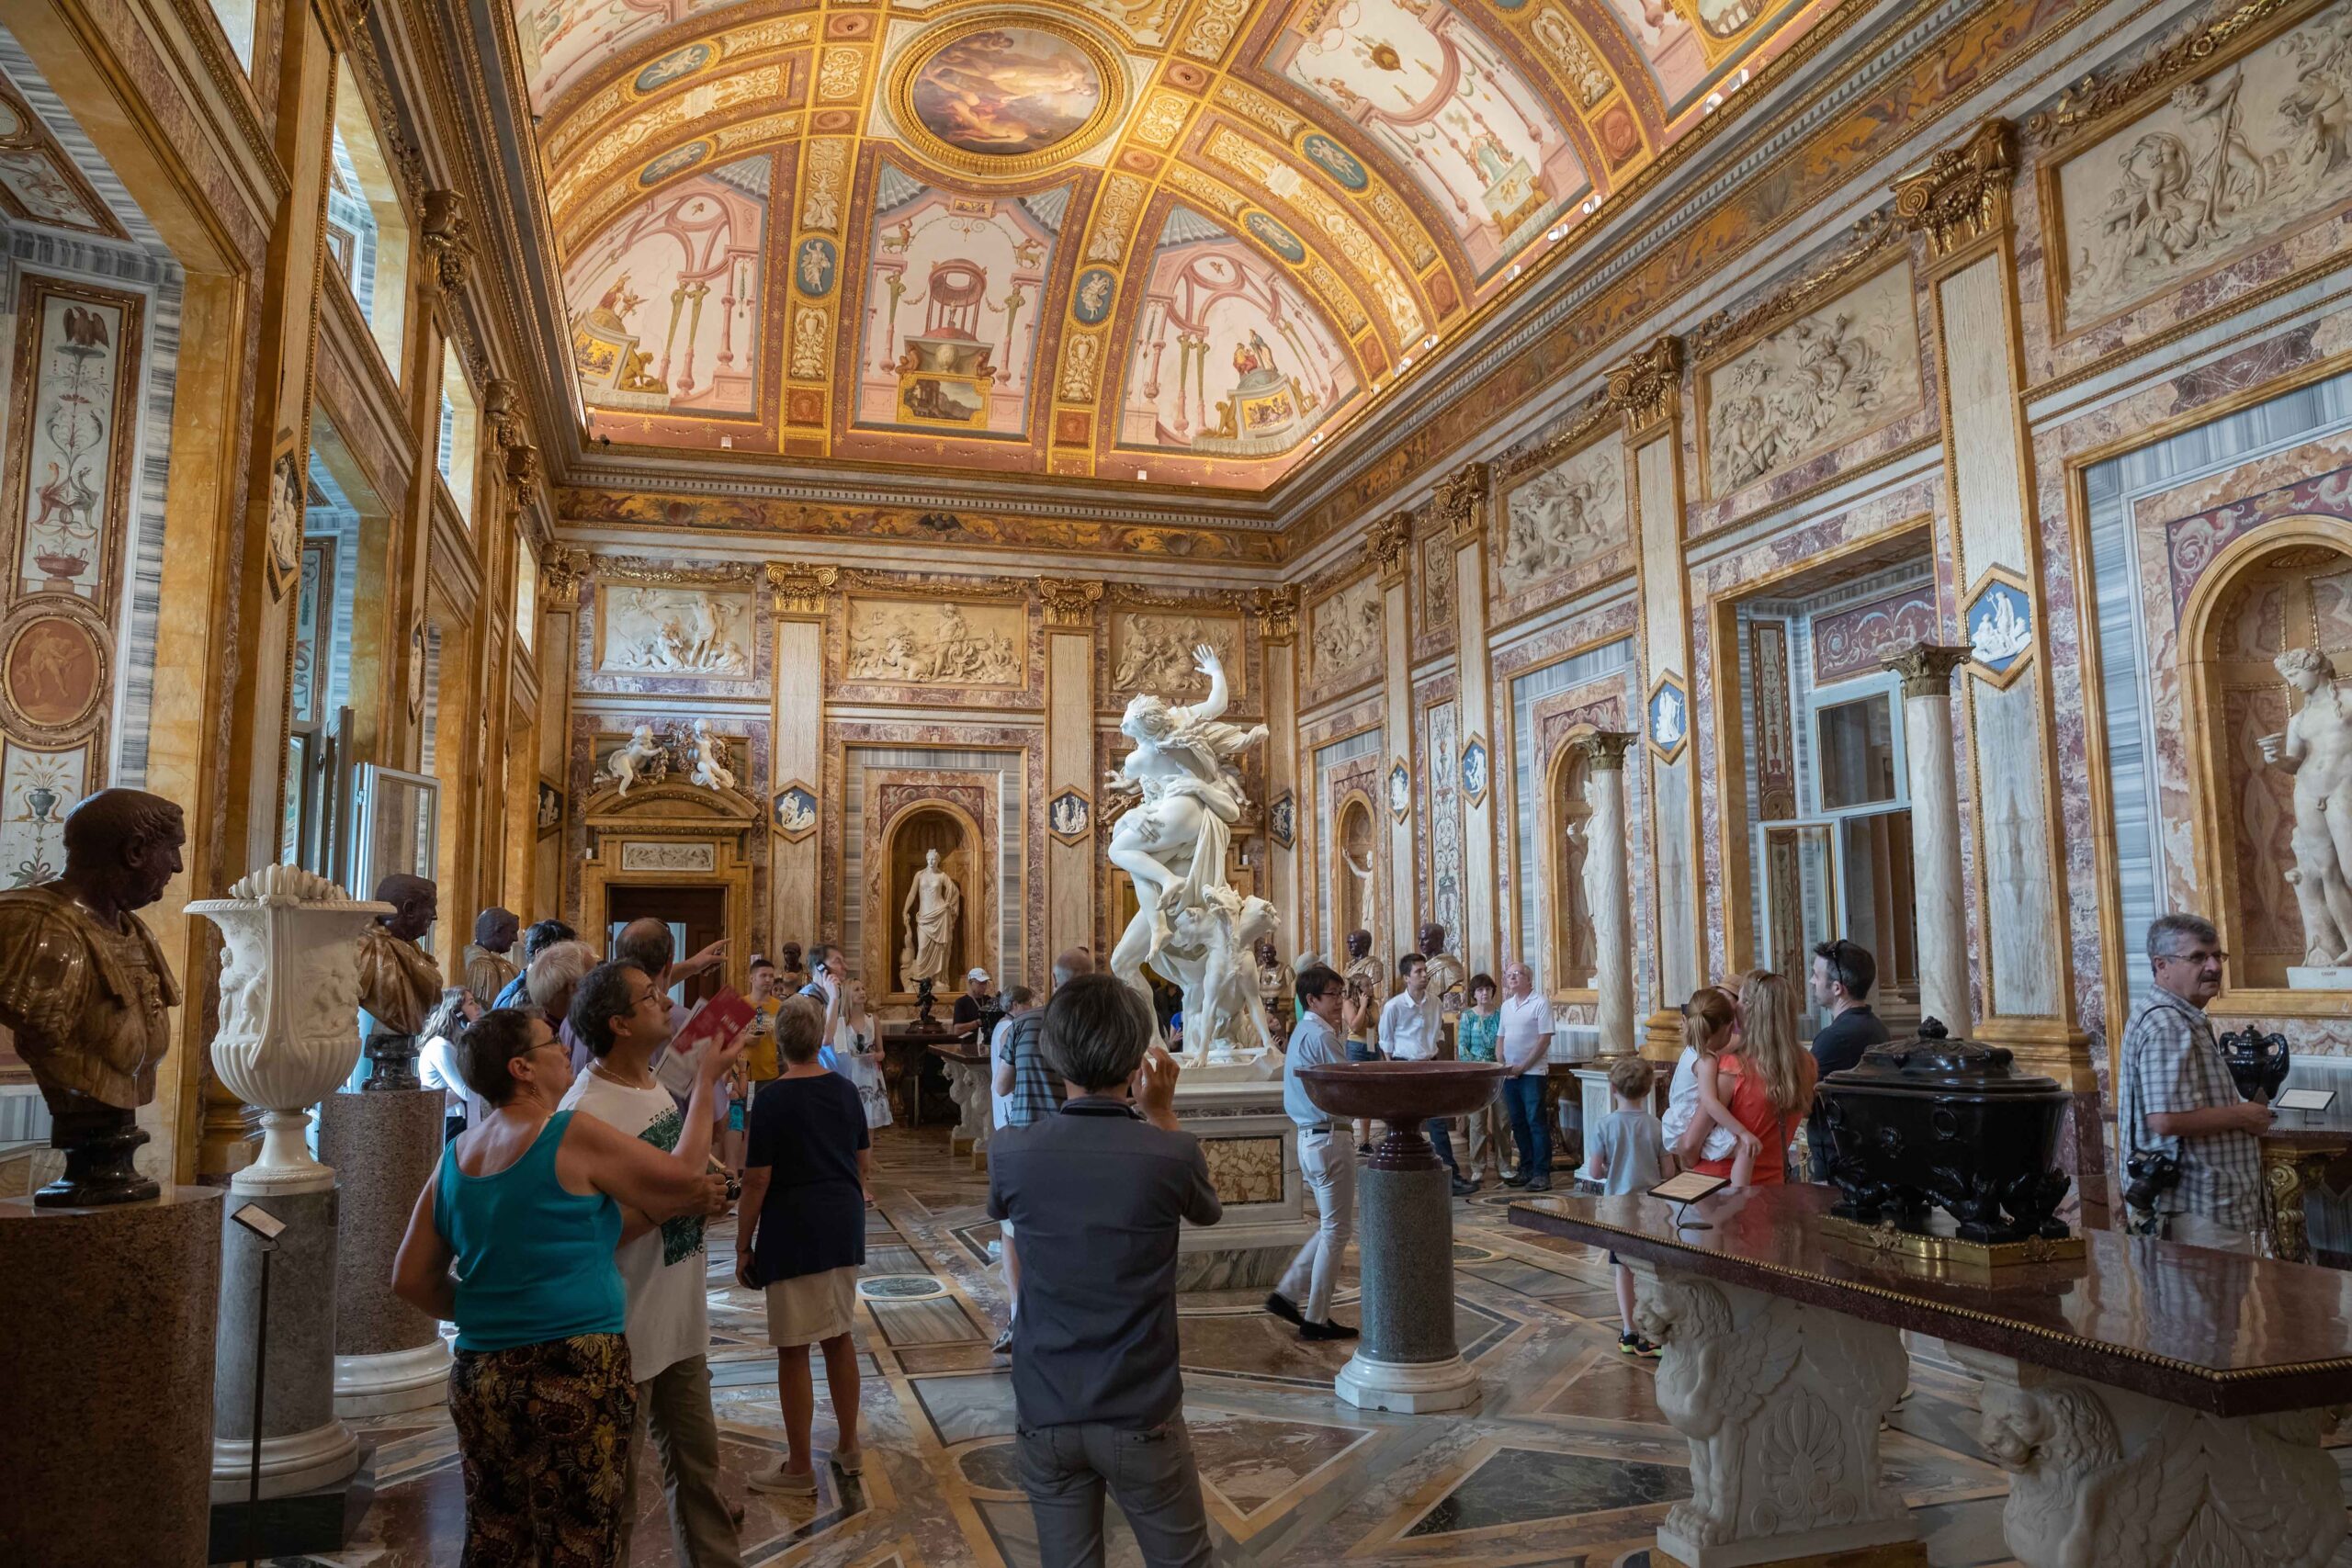 10 Amazing artworks to see at the Borghese Gallery featured image